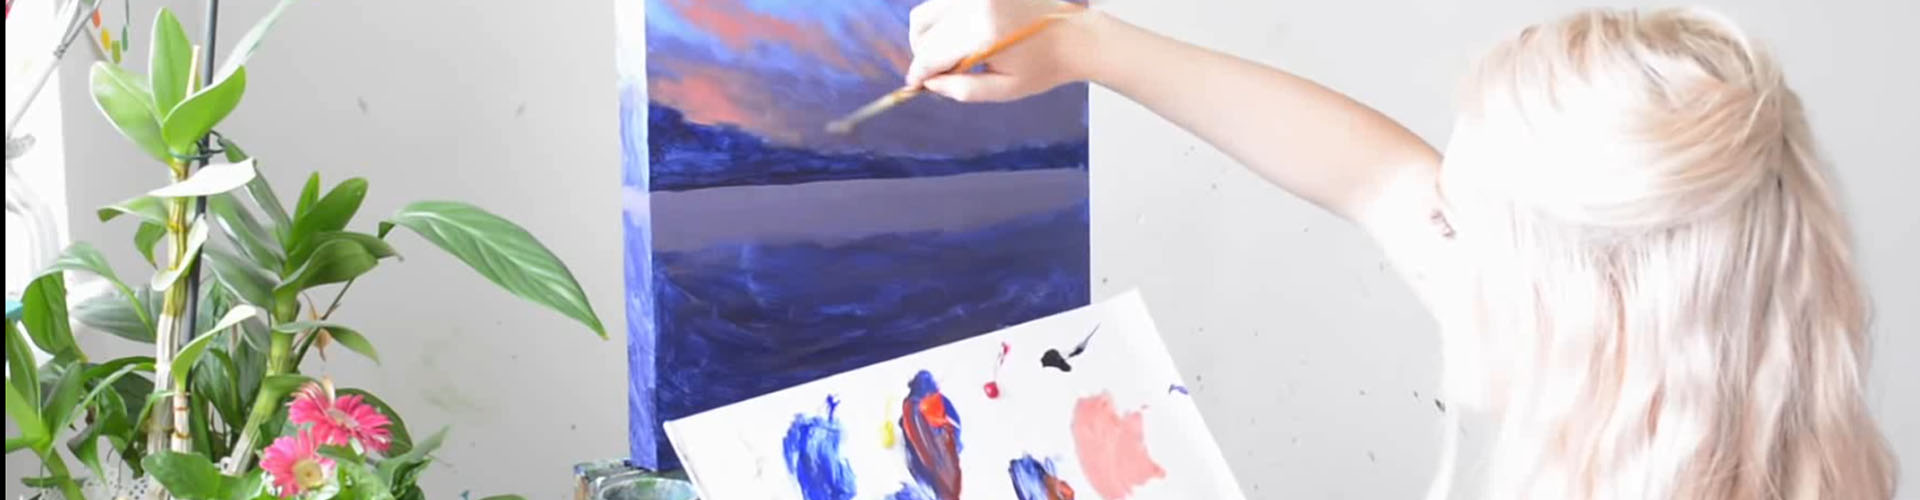 Painting with Acrylics – Seascape Techniques